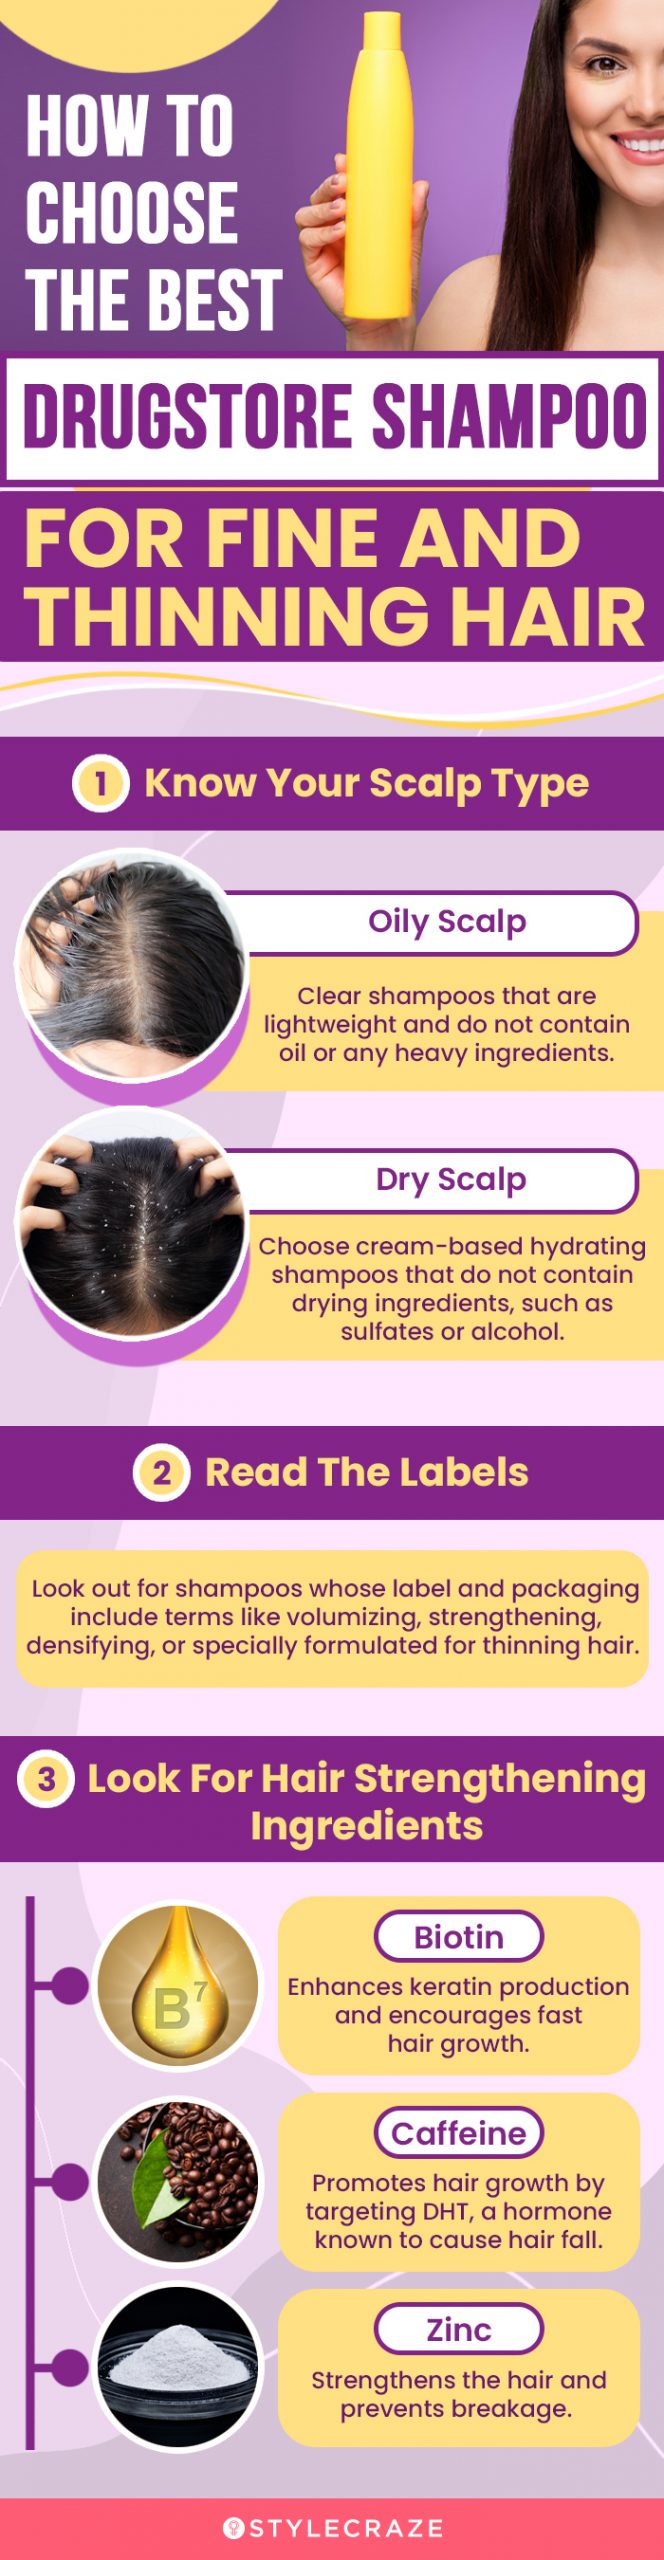 How To Choose The Best Drugstore Shampoo For Fine And Thinning Hair (infographic)